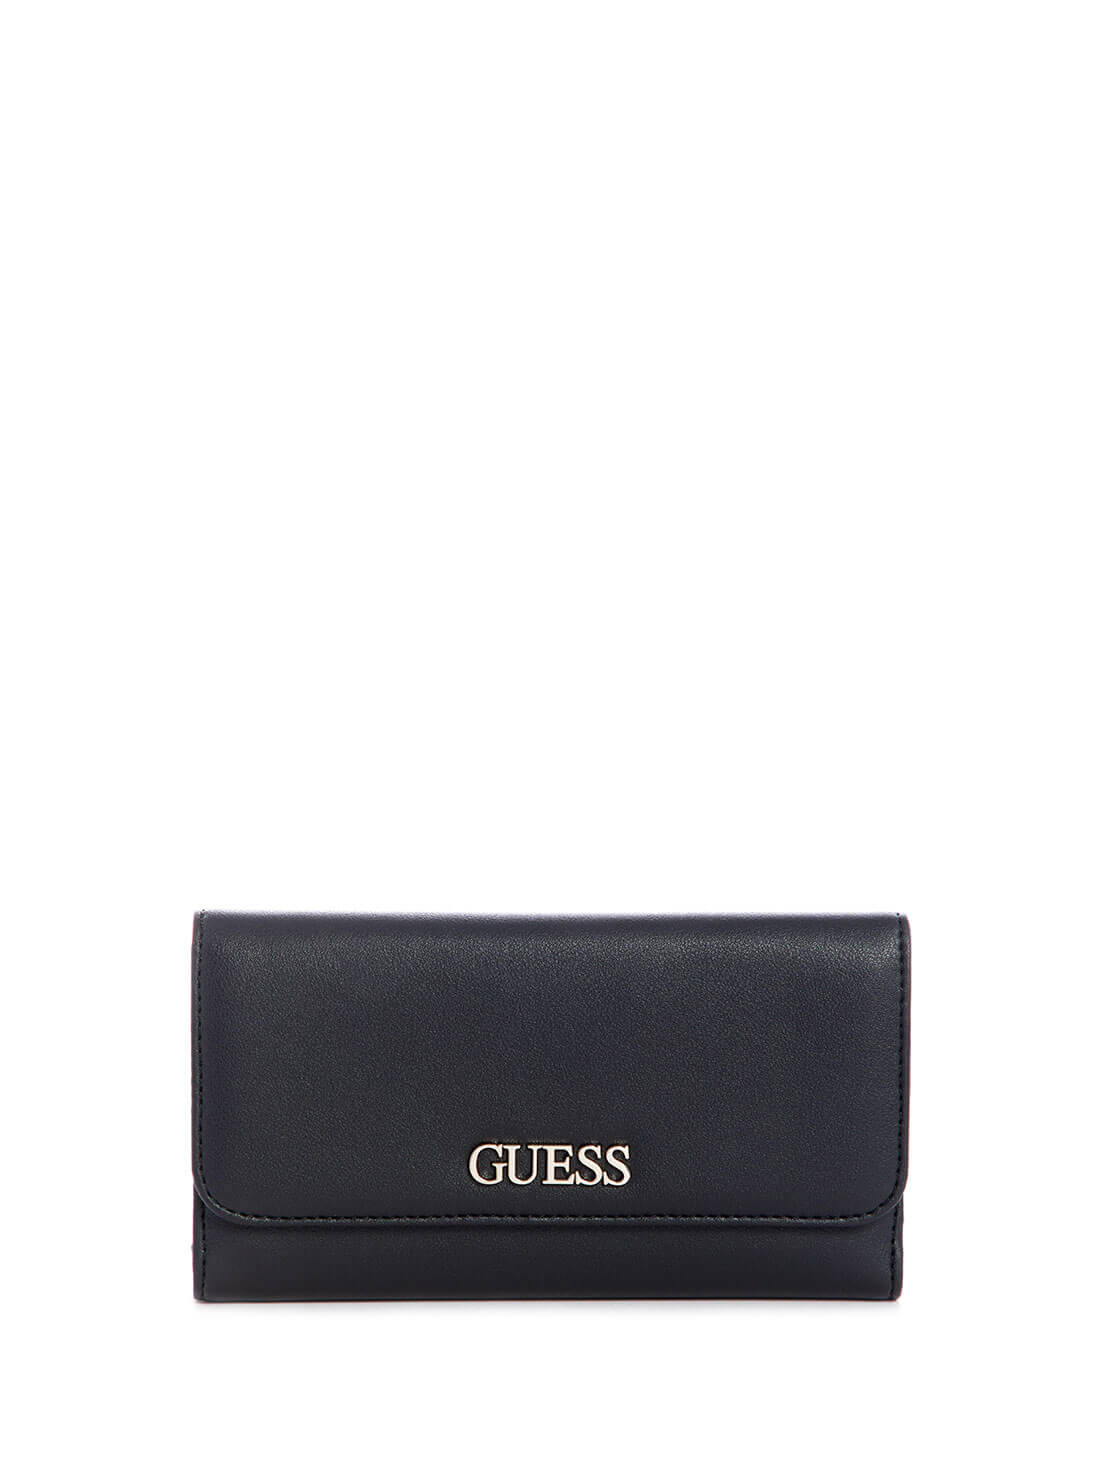 Black Alby Organiser Large Wallet | GUESS Women's Handbags | front view